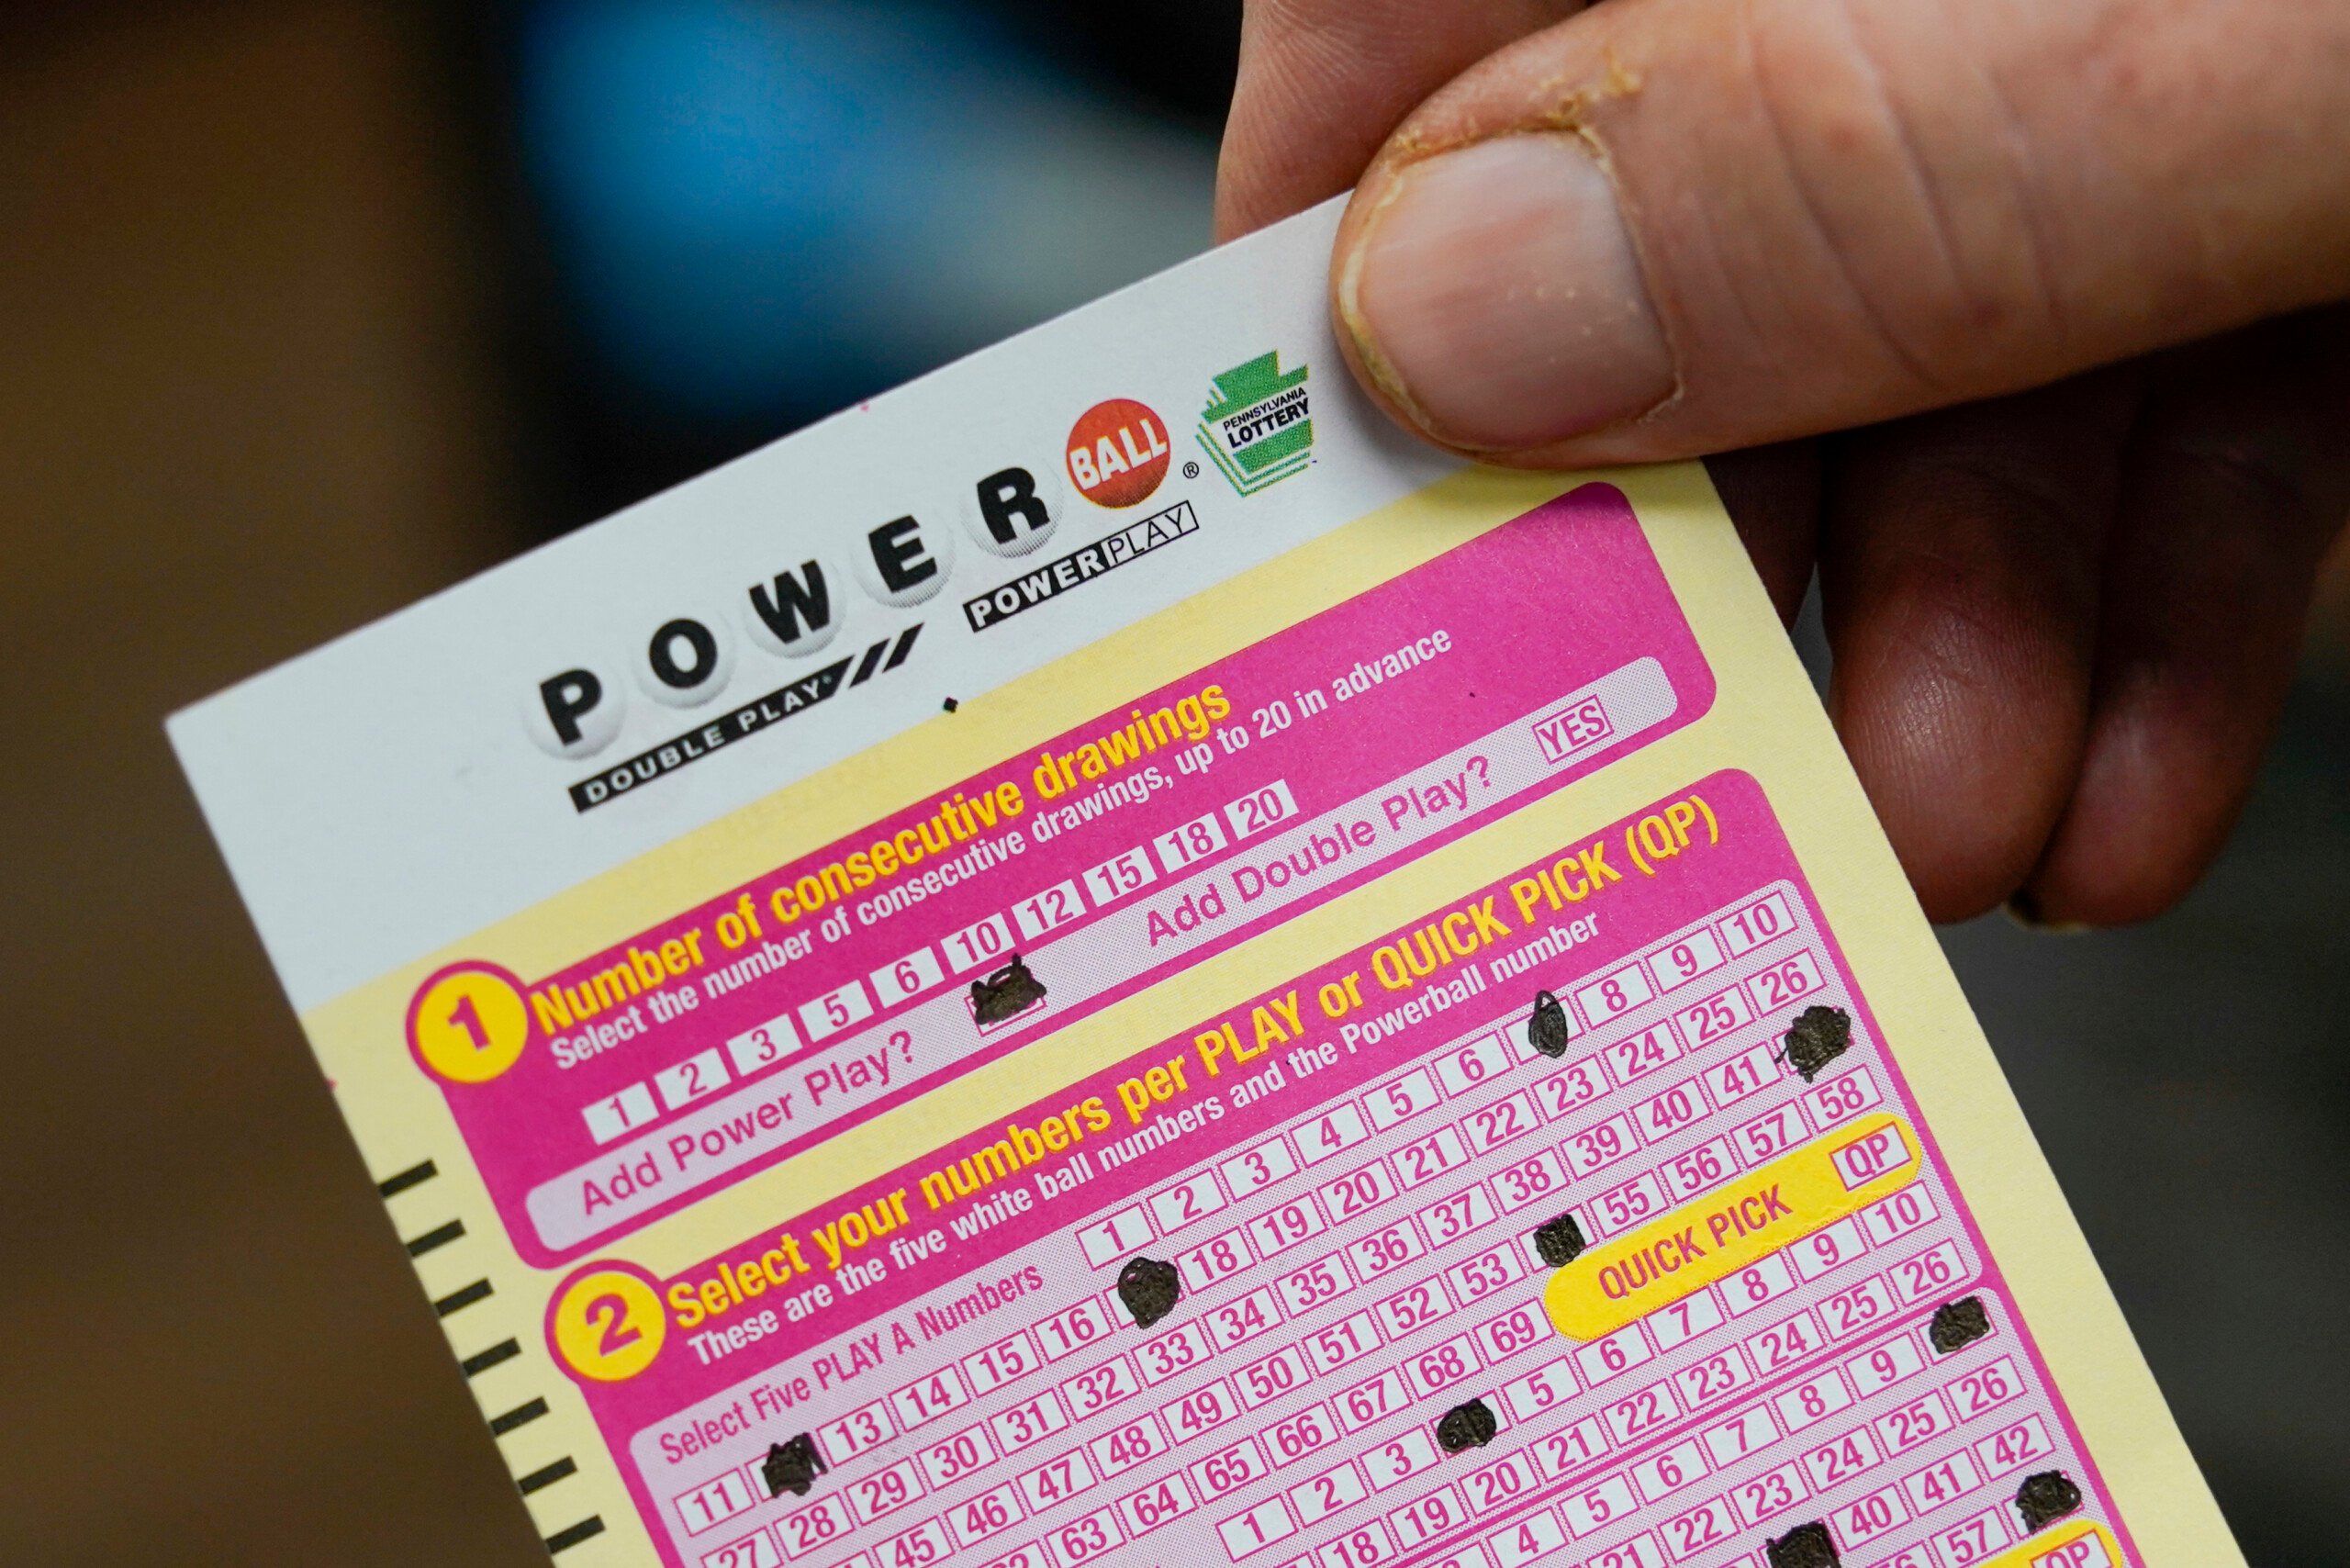 Chester man wins $2 million with lottery ticket, largest prize offered on  S.C. scratch-off